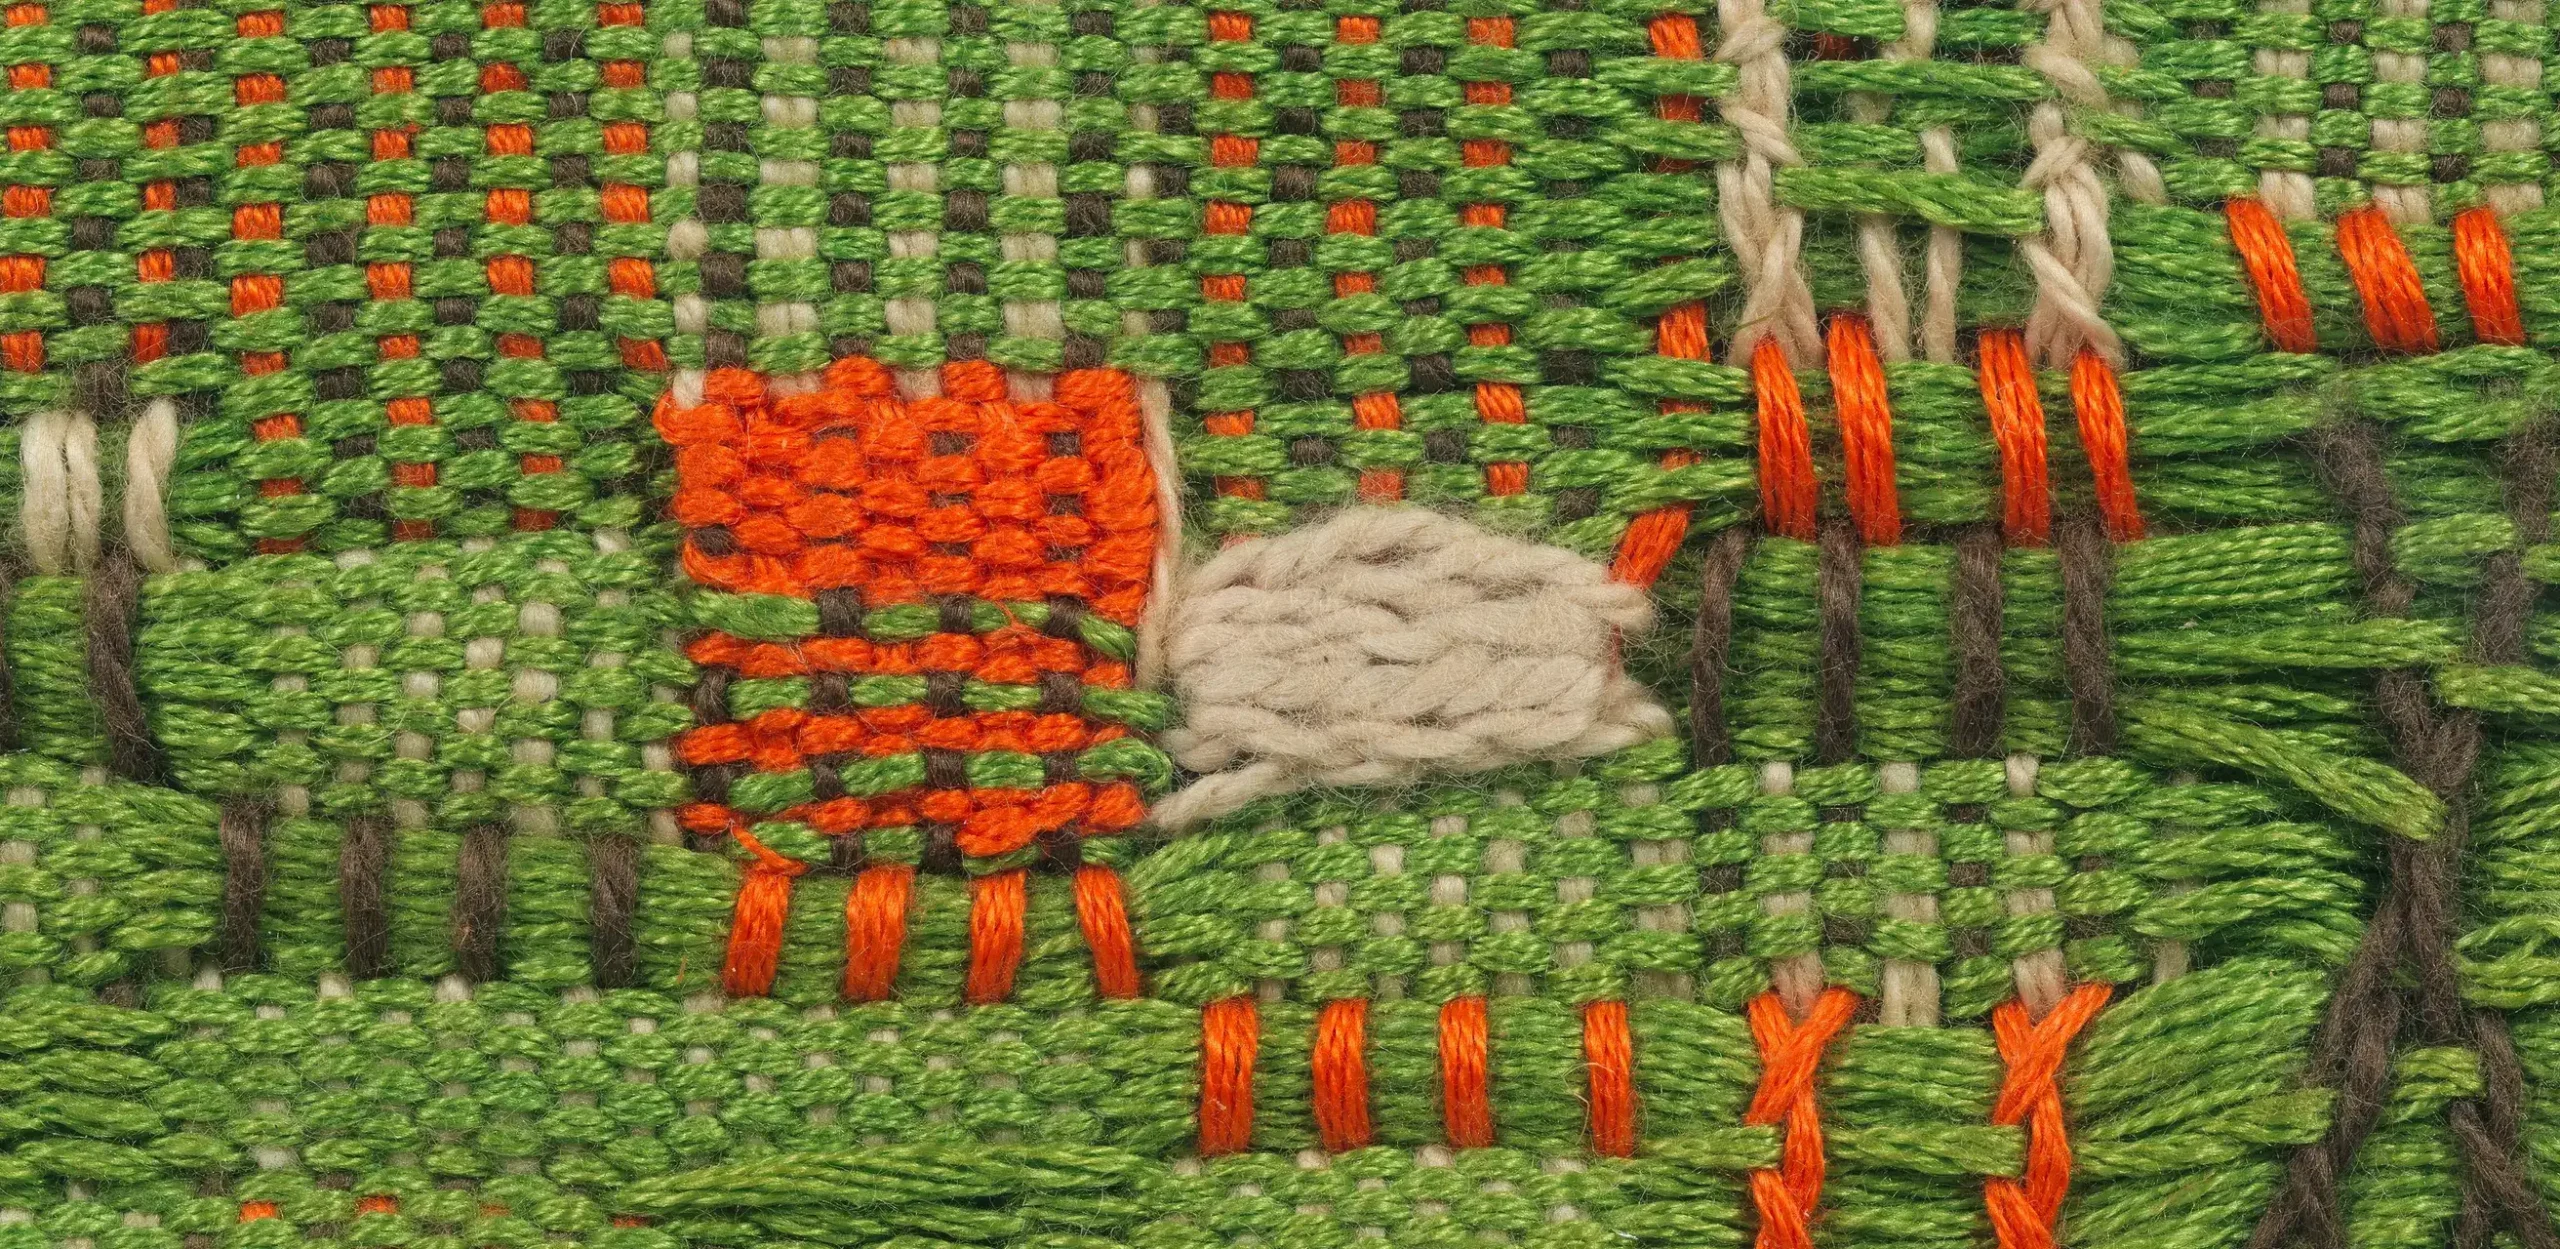 Close up of knit weaving